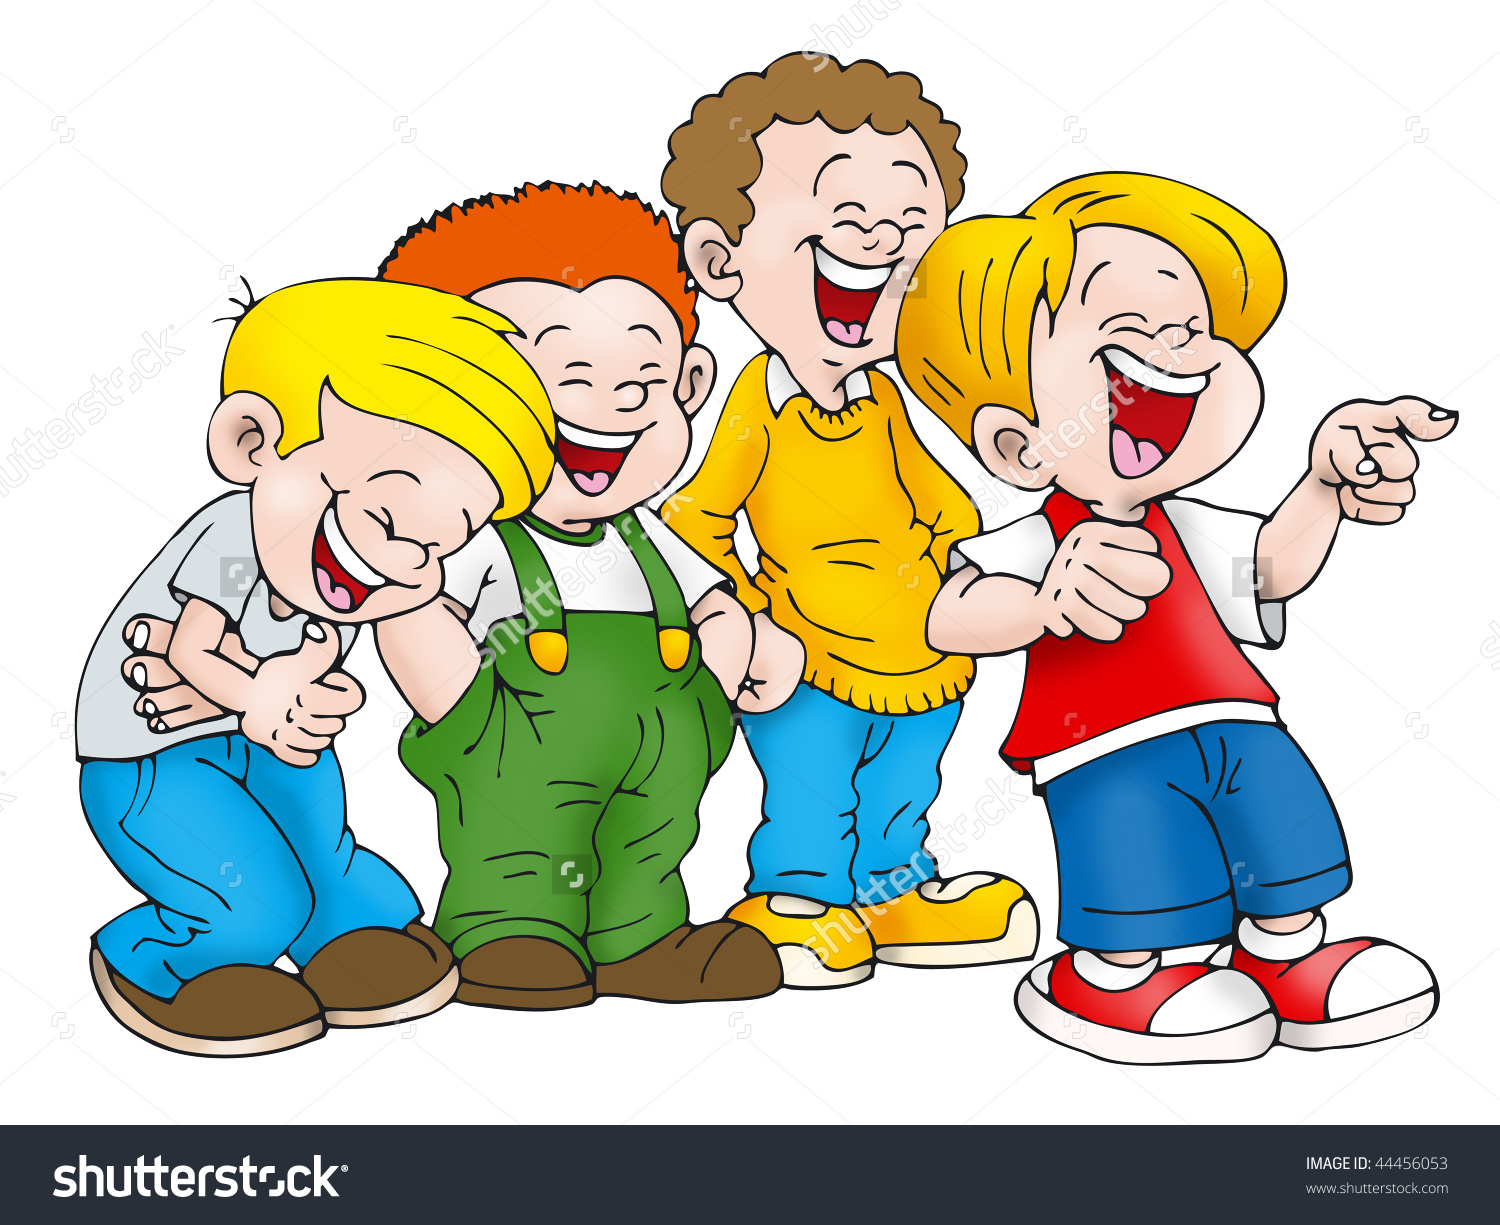 laughter clipart. Anywho Lol